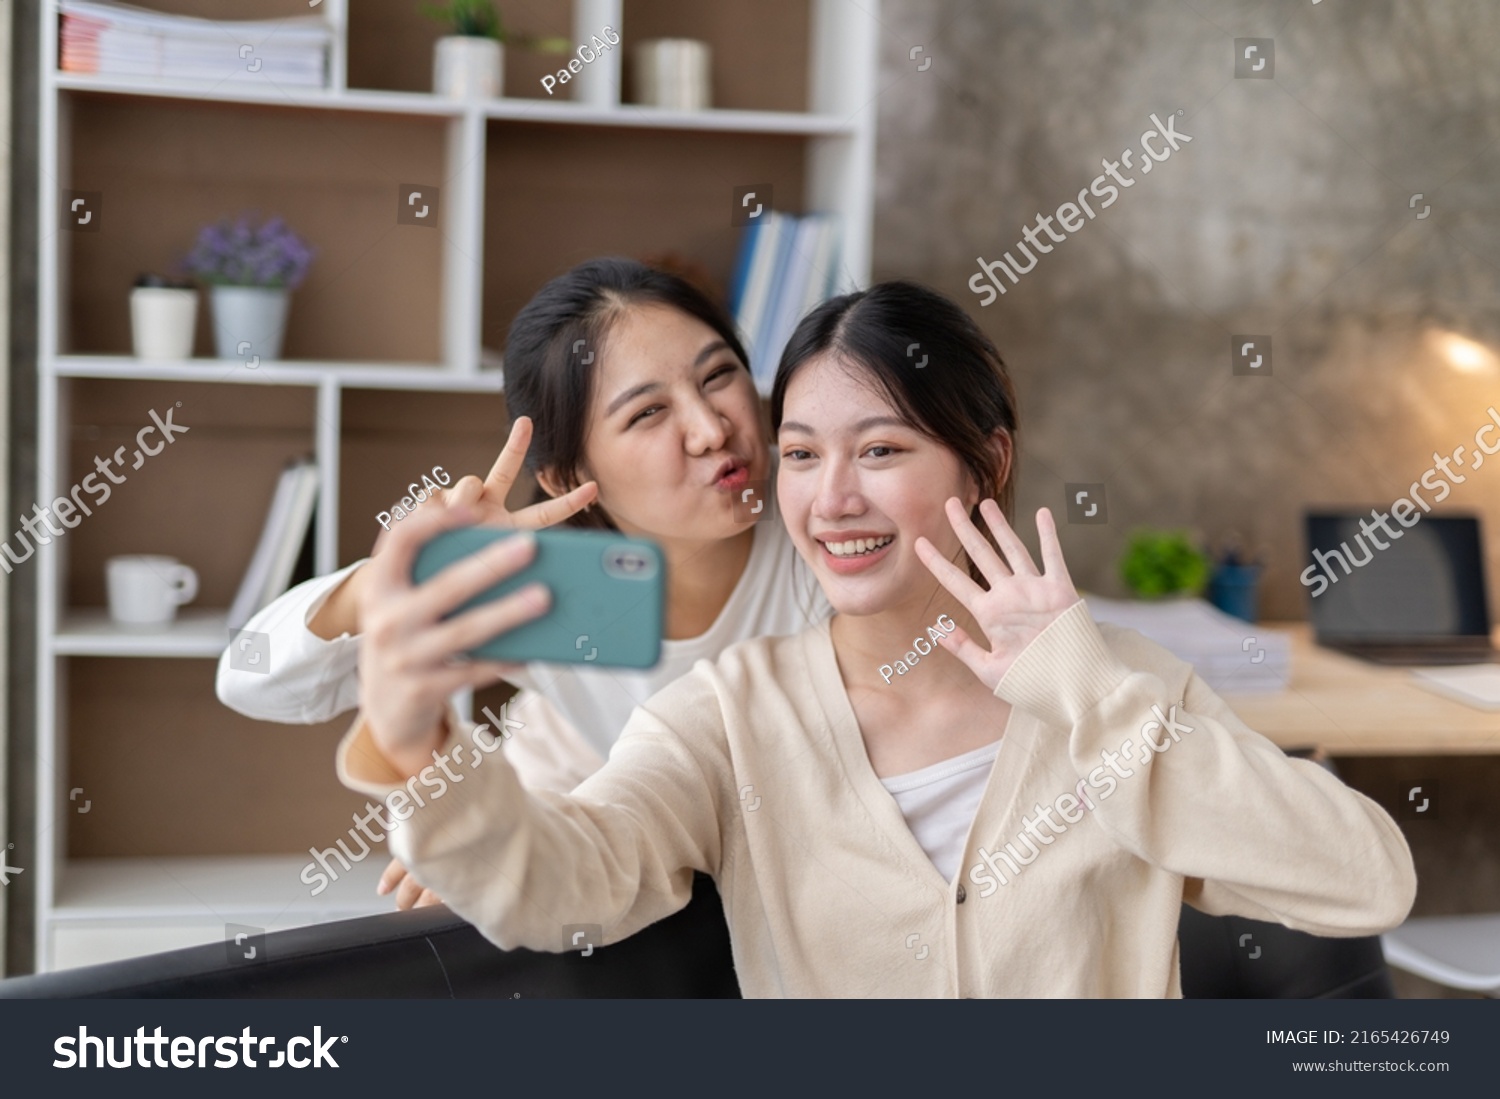 Lgbt Lesbian Couple Love Moments Happiness Stock Photo Shutterstock